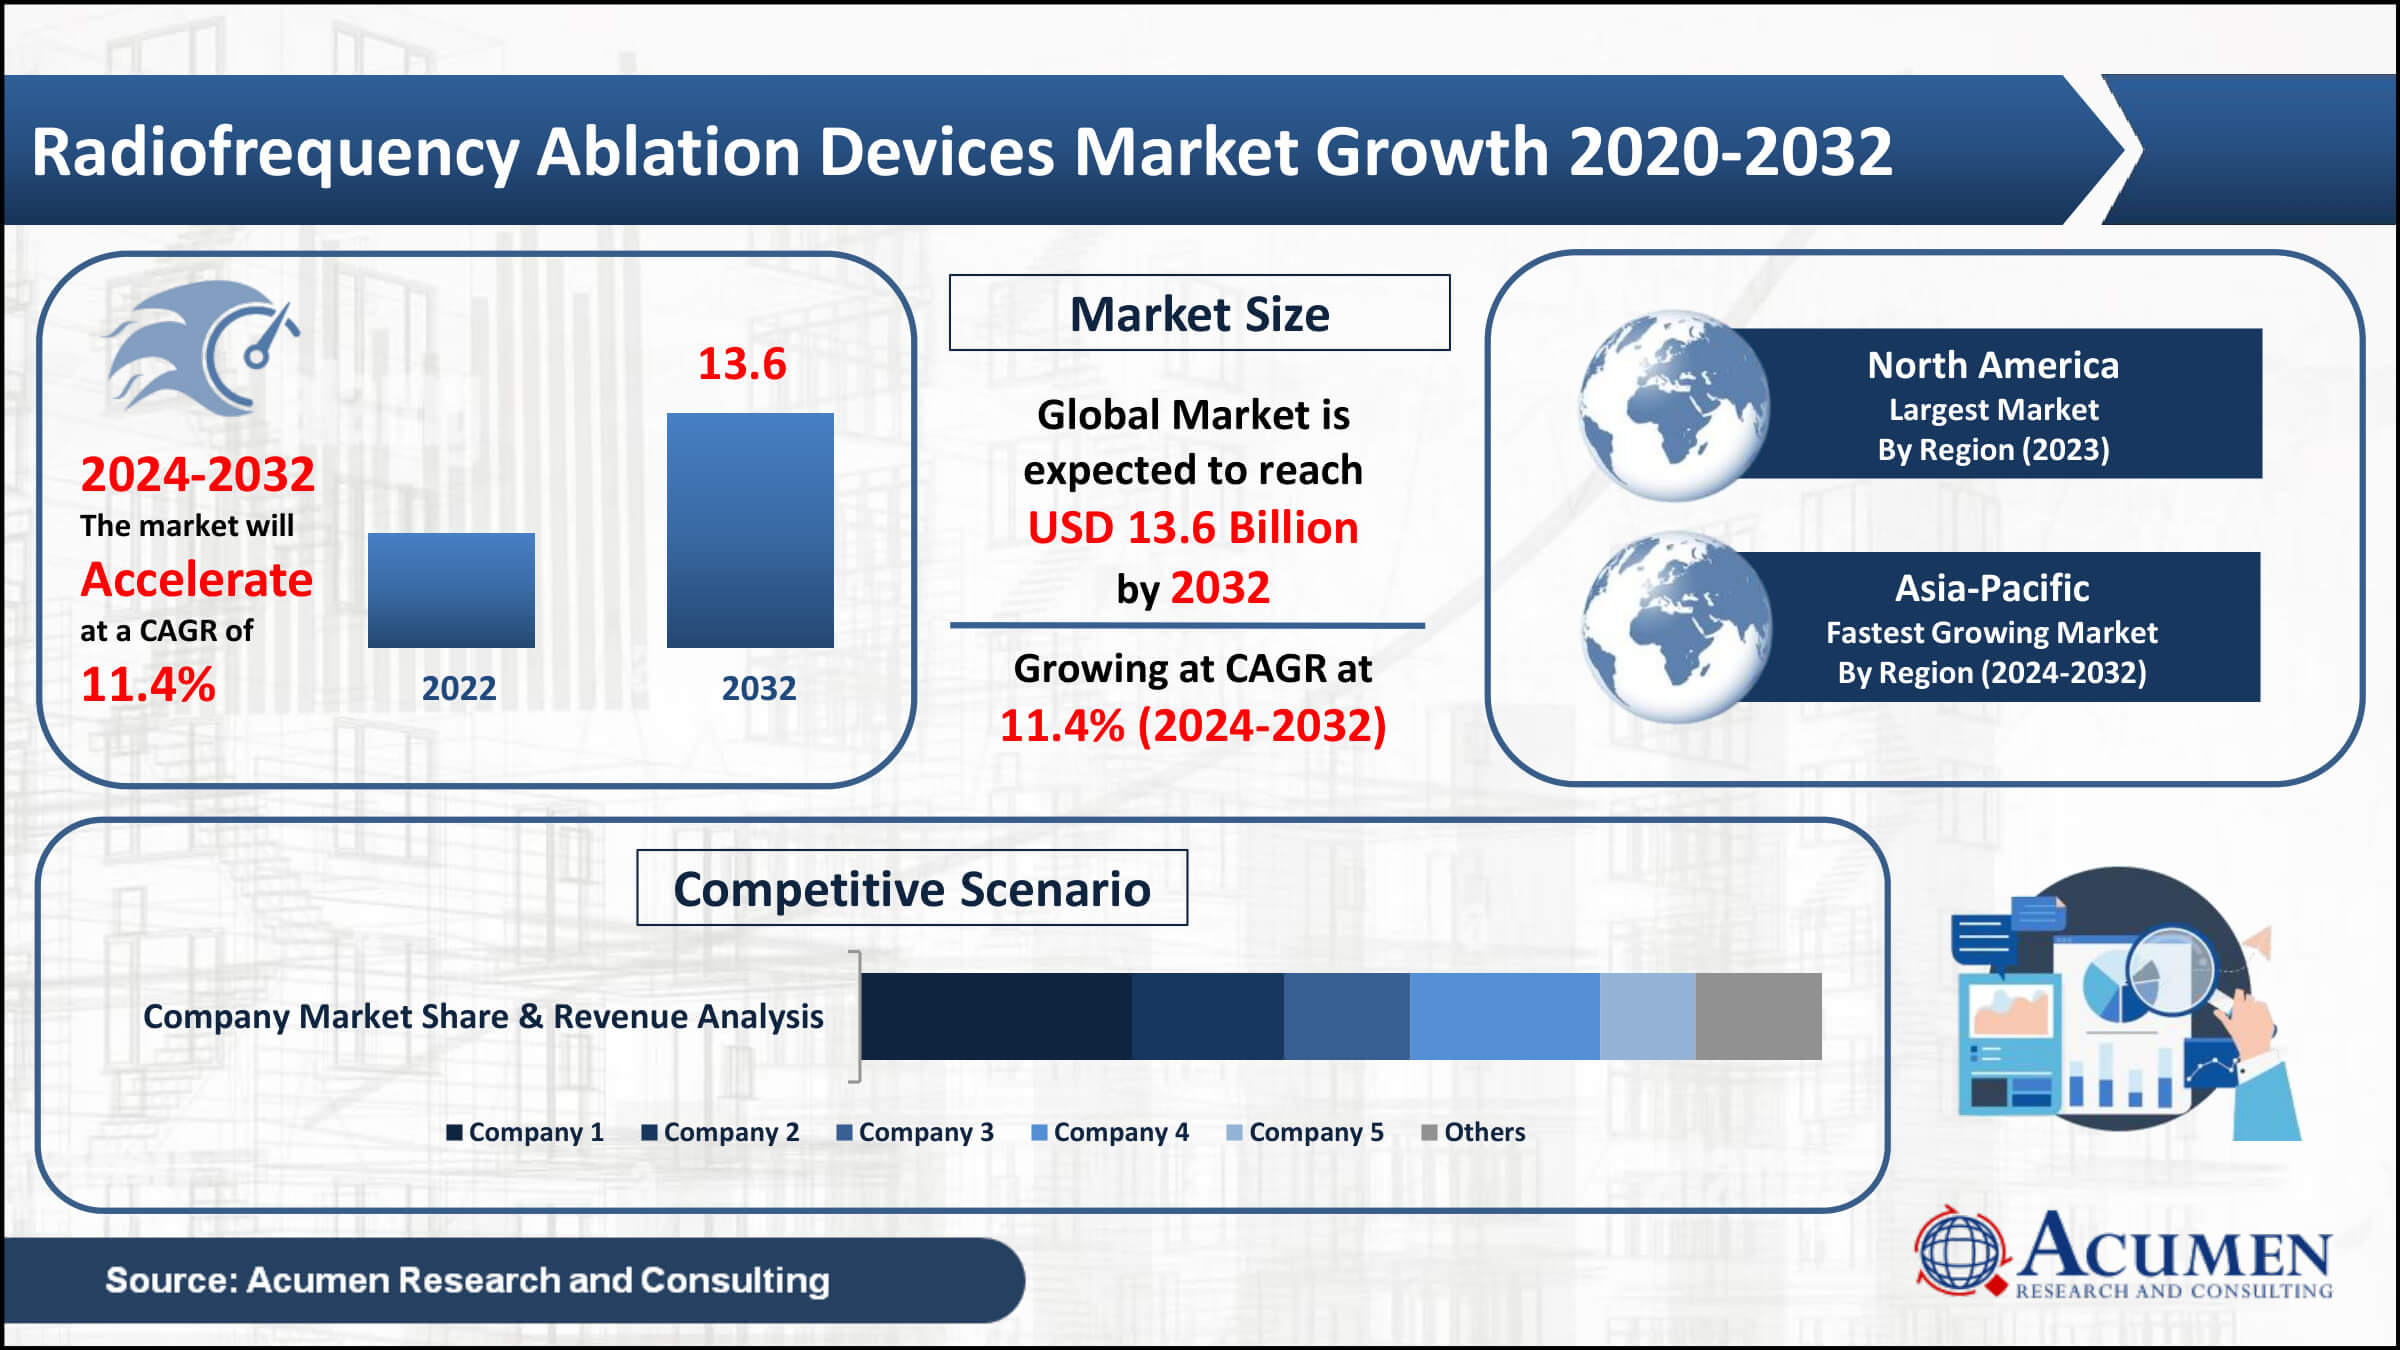 Radiofrequency Ablation Devices Market Value 